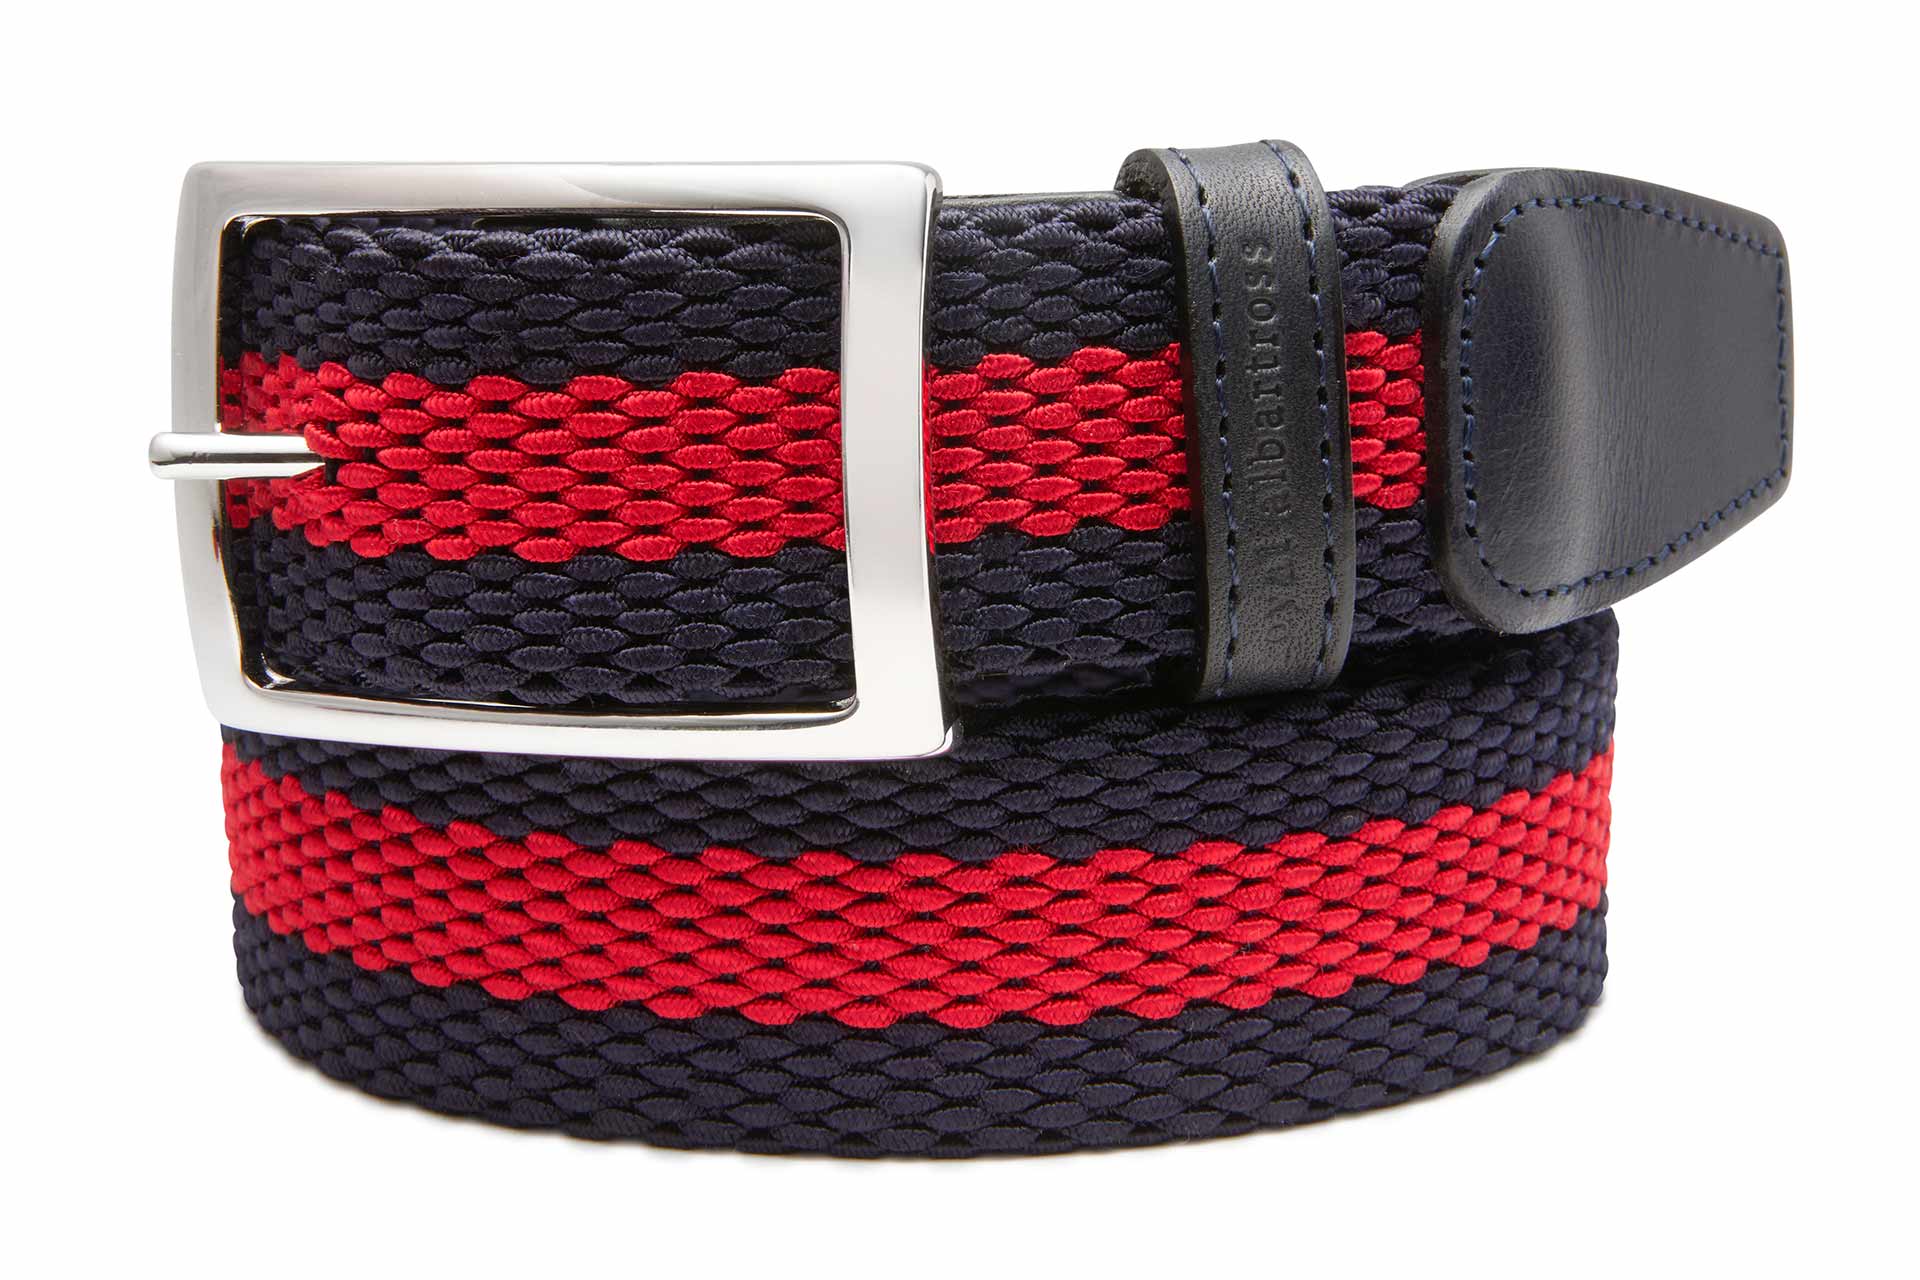 The Oxford Tri-Color Woven Stretch Belt